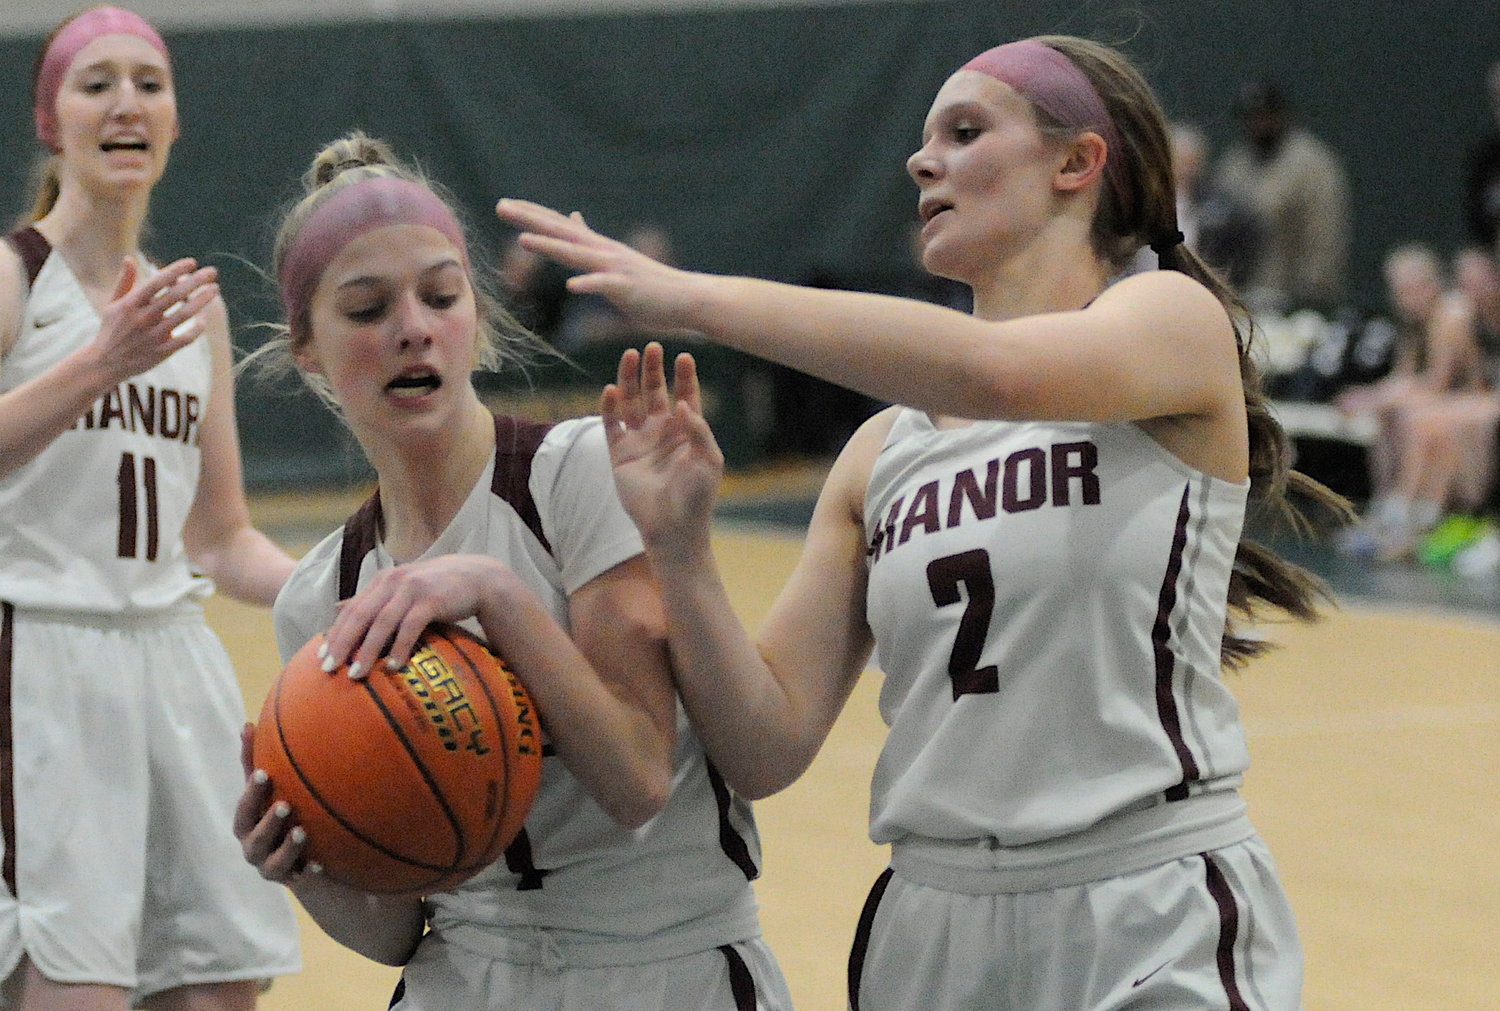 Double rebounders. Manor’s Alyssa Peck and Mackenzie Carlson both go for a rebound. Carlson scored 11 points.